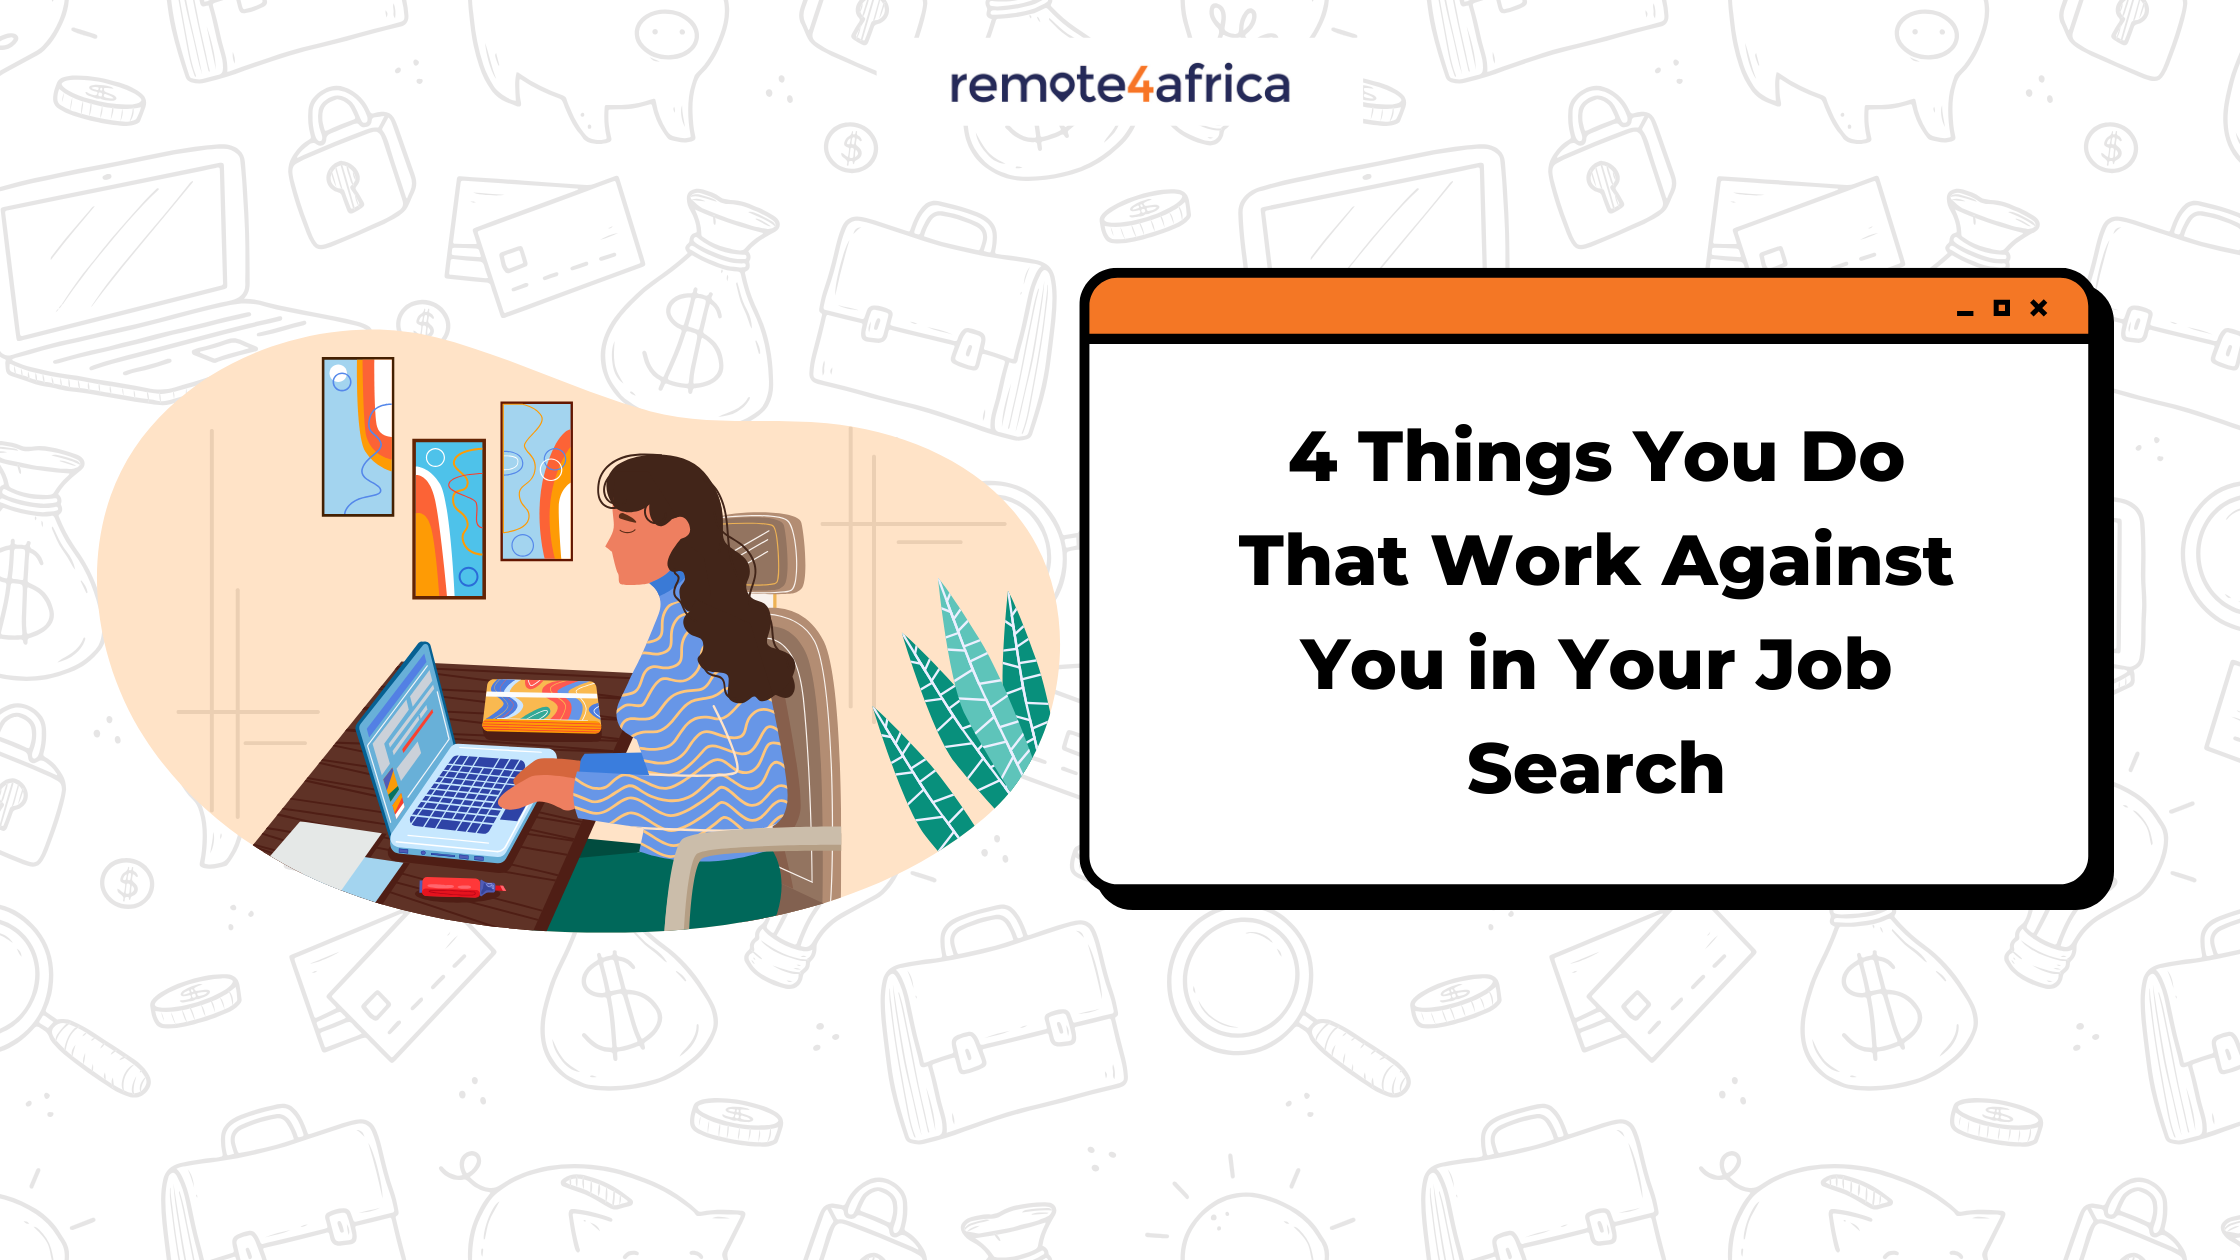 4 Things You Do That Work Against You in Your Job Search